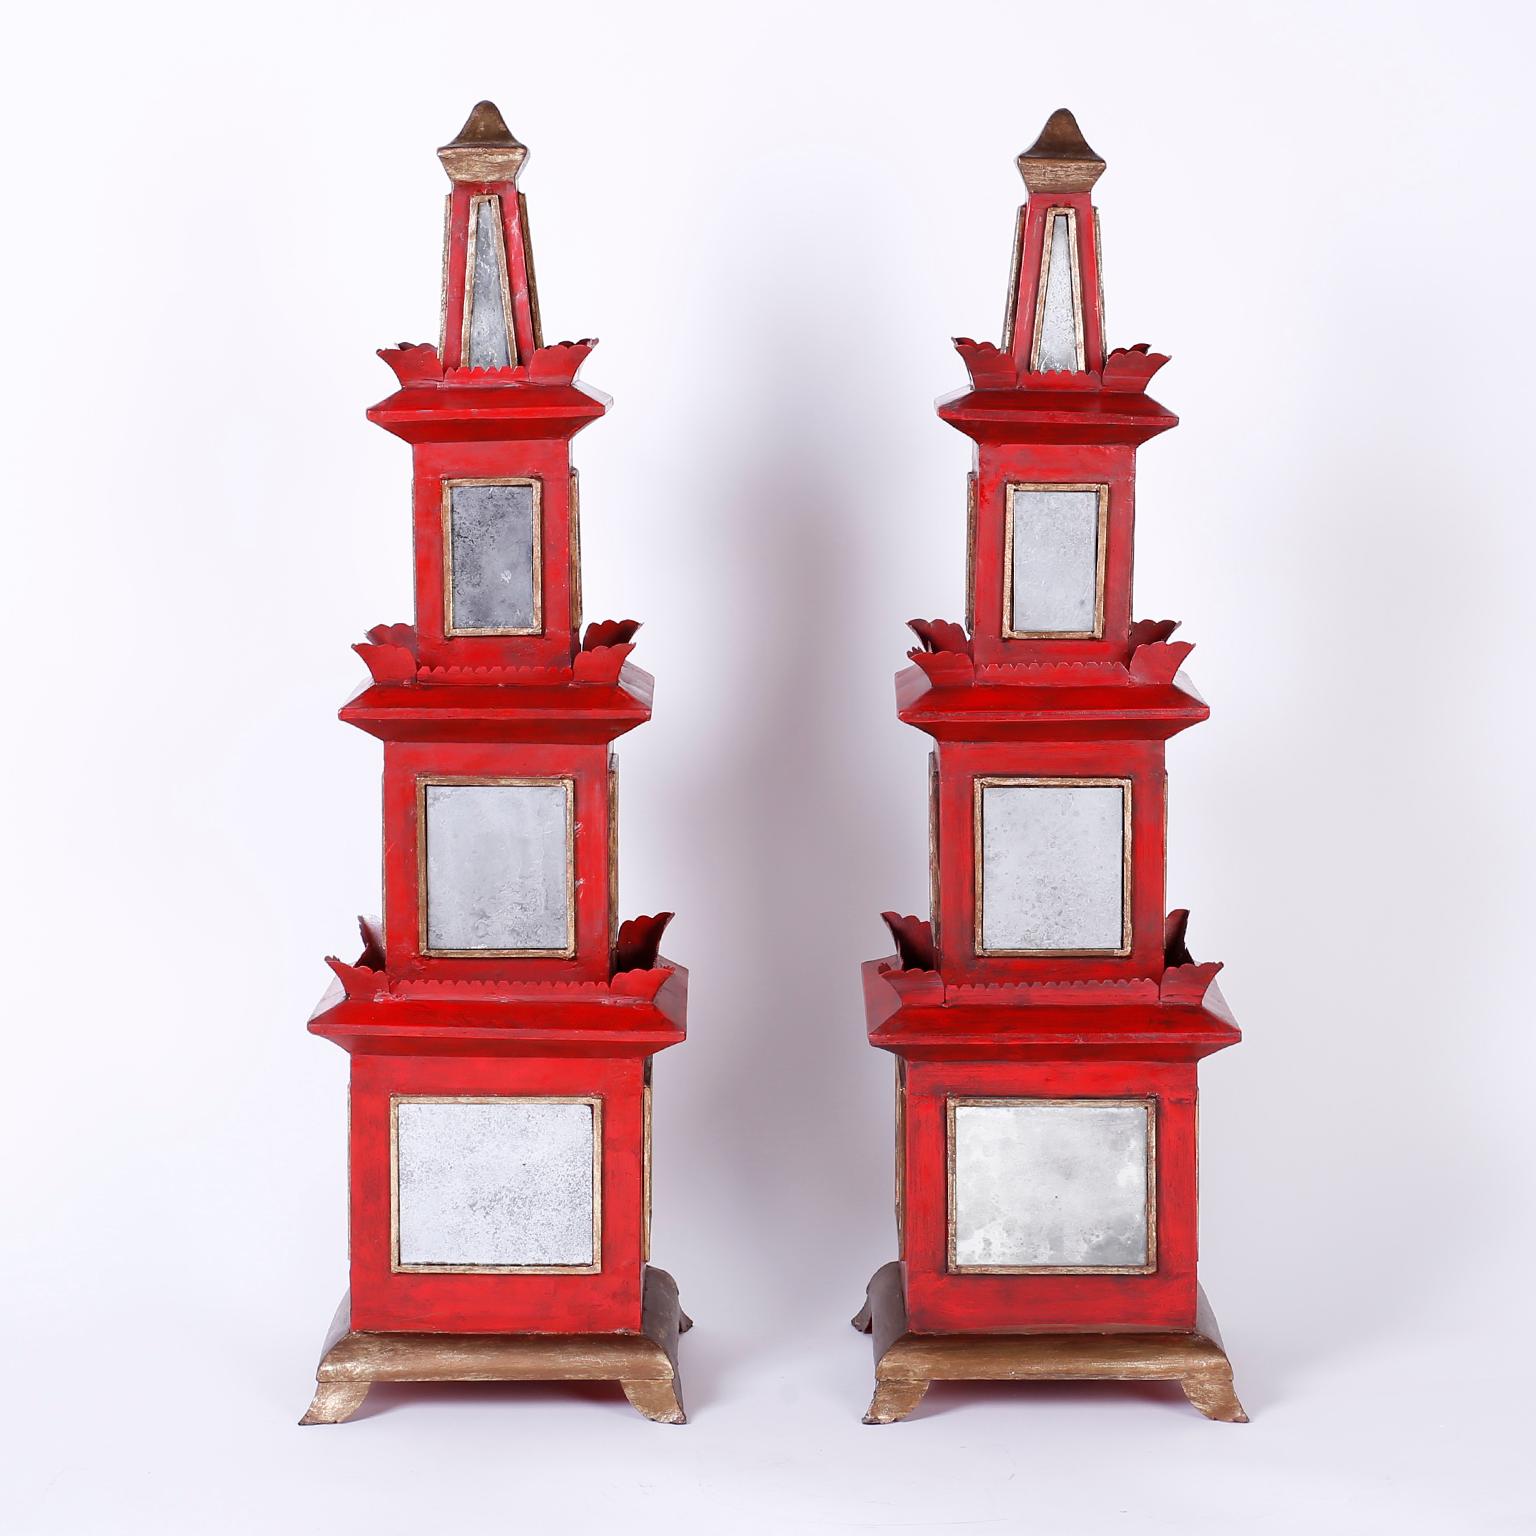 Dramatic pair of midcentury pagodas crafted with wood and metal painted red and decorated with distressed mirrors. The finials, bases, and mirror frames are distressed gold leaf. The large-scale and unusual mixture of materials make these a unique